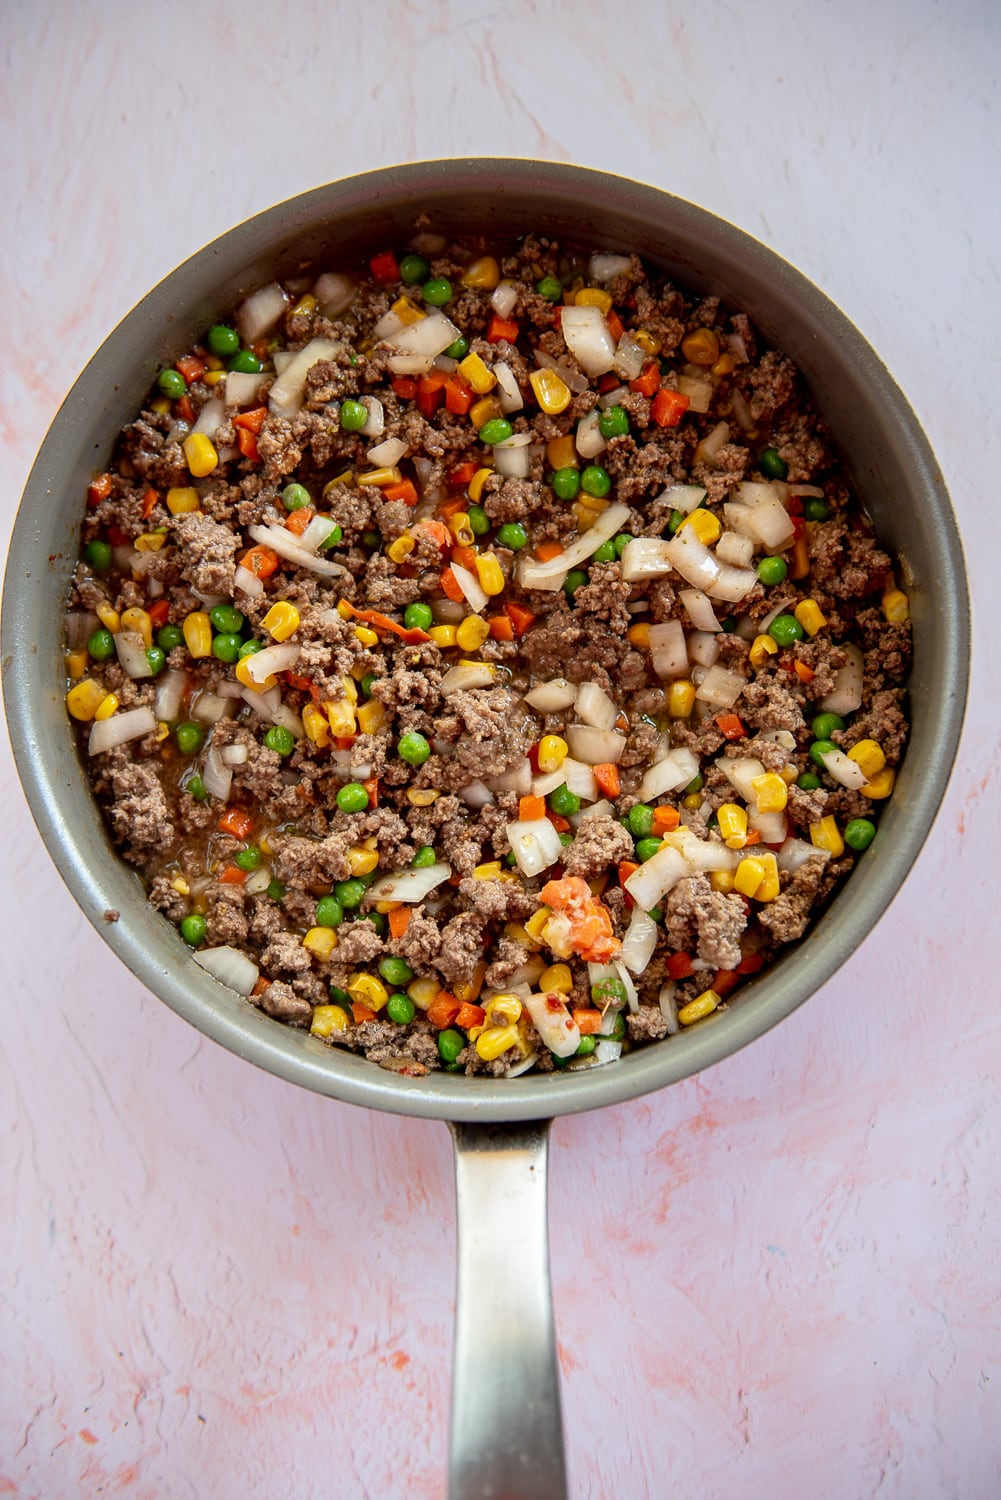 ground beef cooked with with mixed veggies like corn, onions, carrots, and green pies inside in silver skillet with pink background